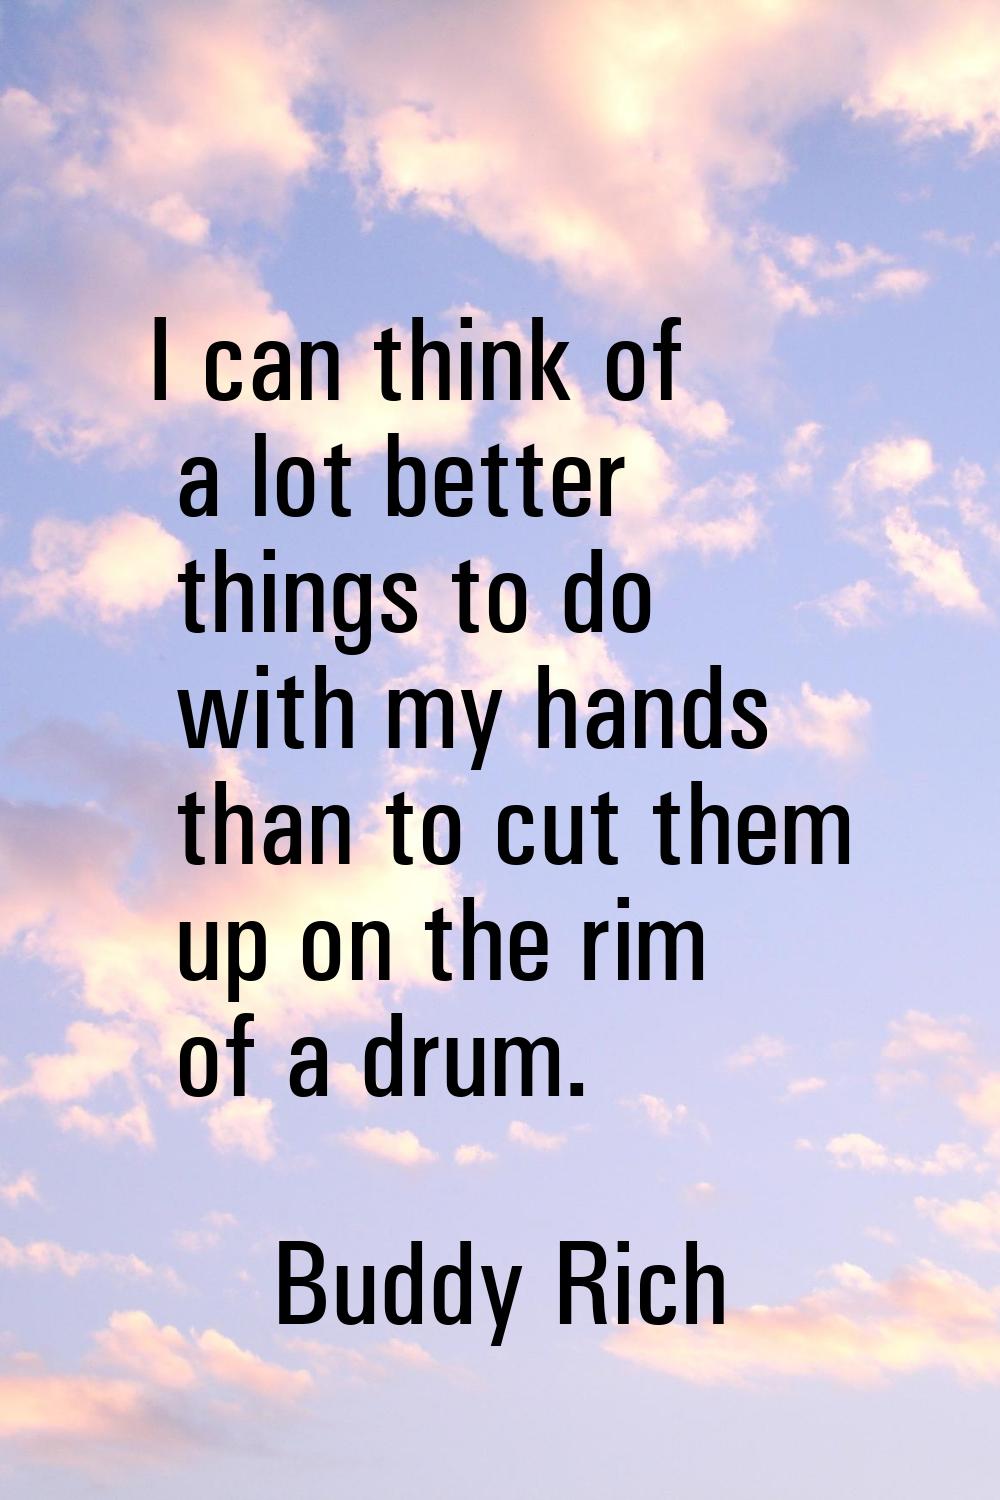 I can think of a lot better things to do with my hands than to cut them up on the rim of a drum.